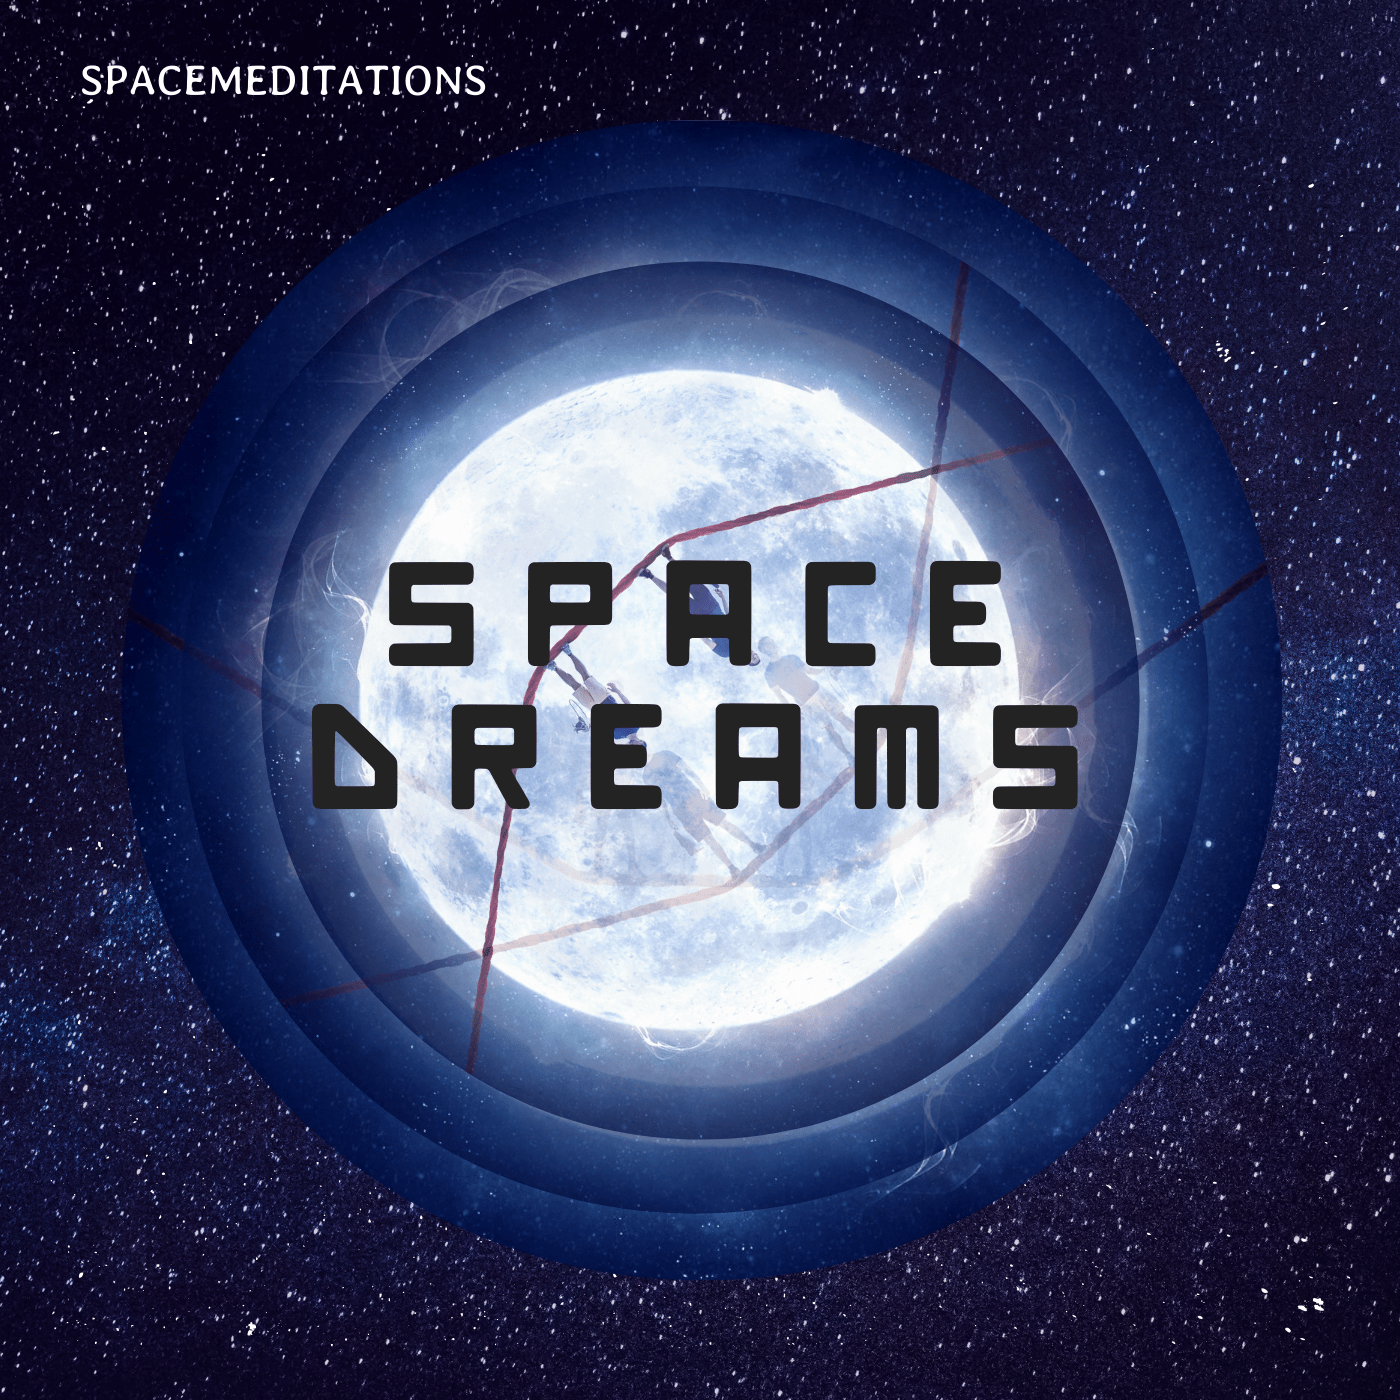 Space Dreams. Spacemeditations